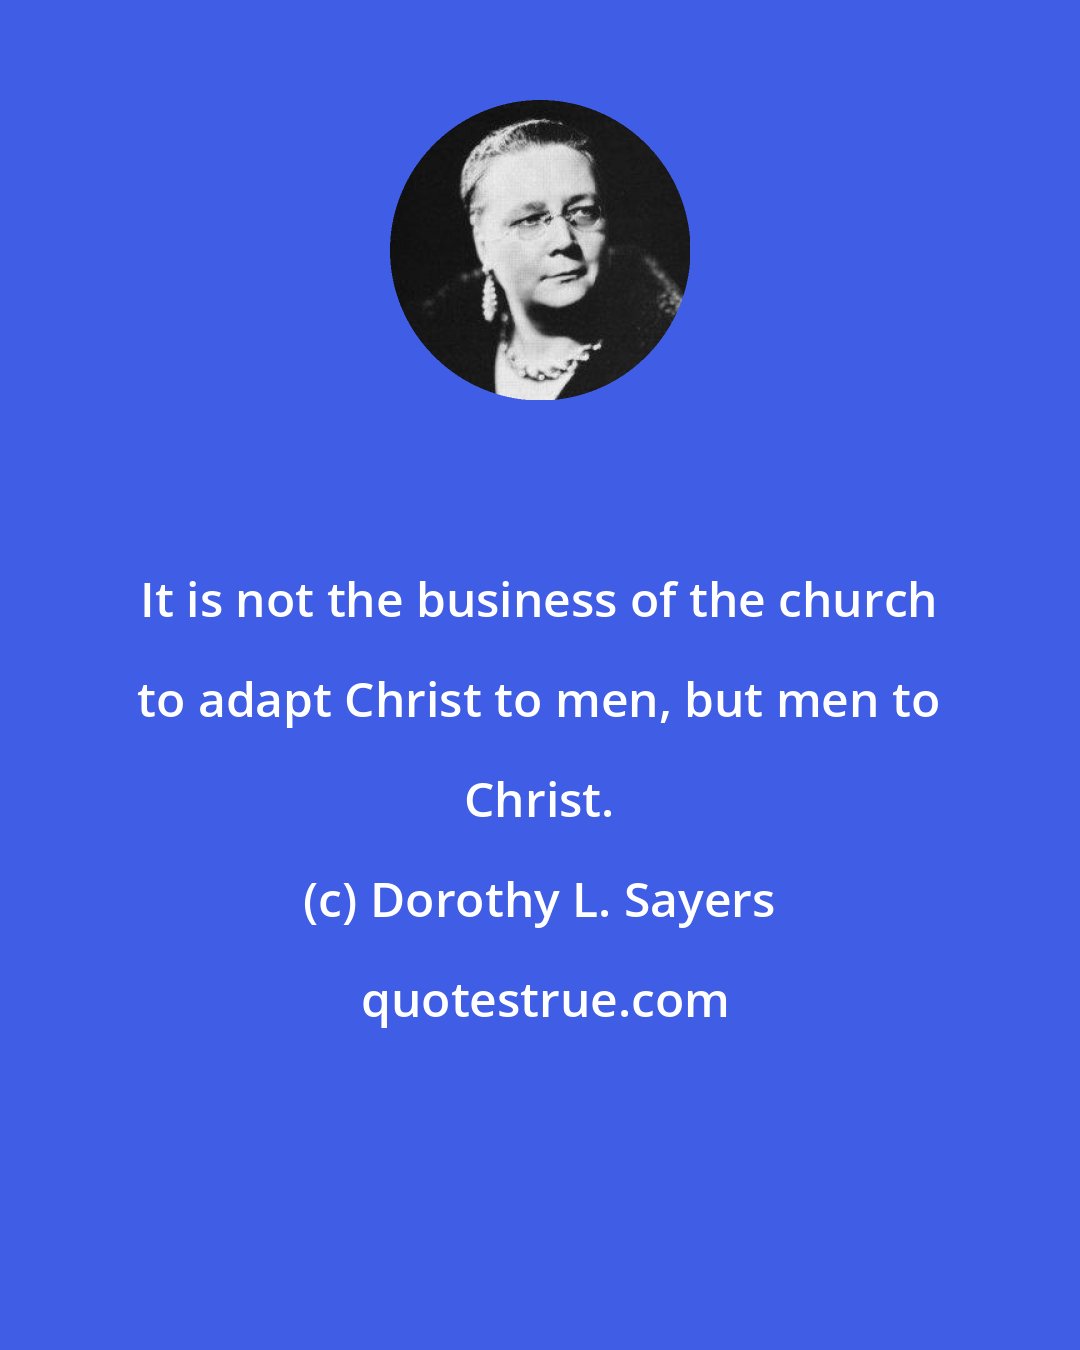 Dorothy L. Sayers: It is not the business of the church to adapt Christ to men, but men to Christ.